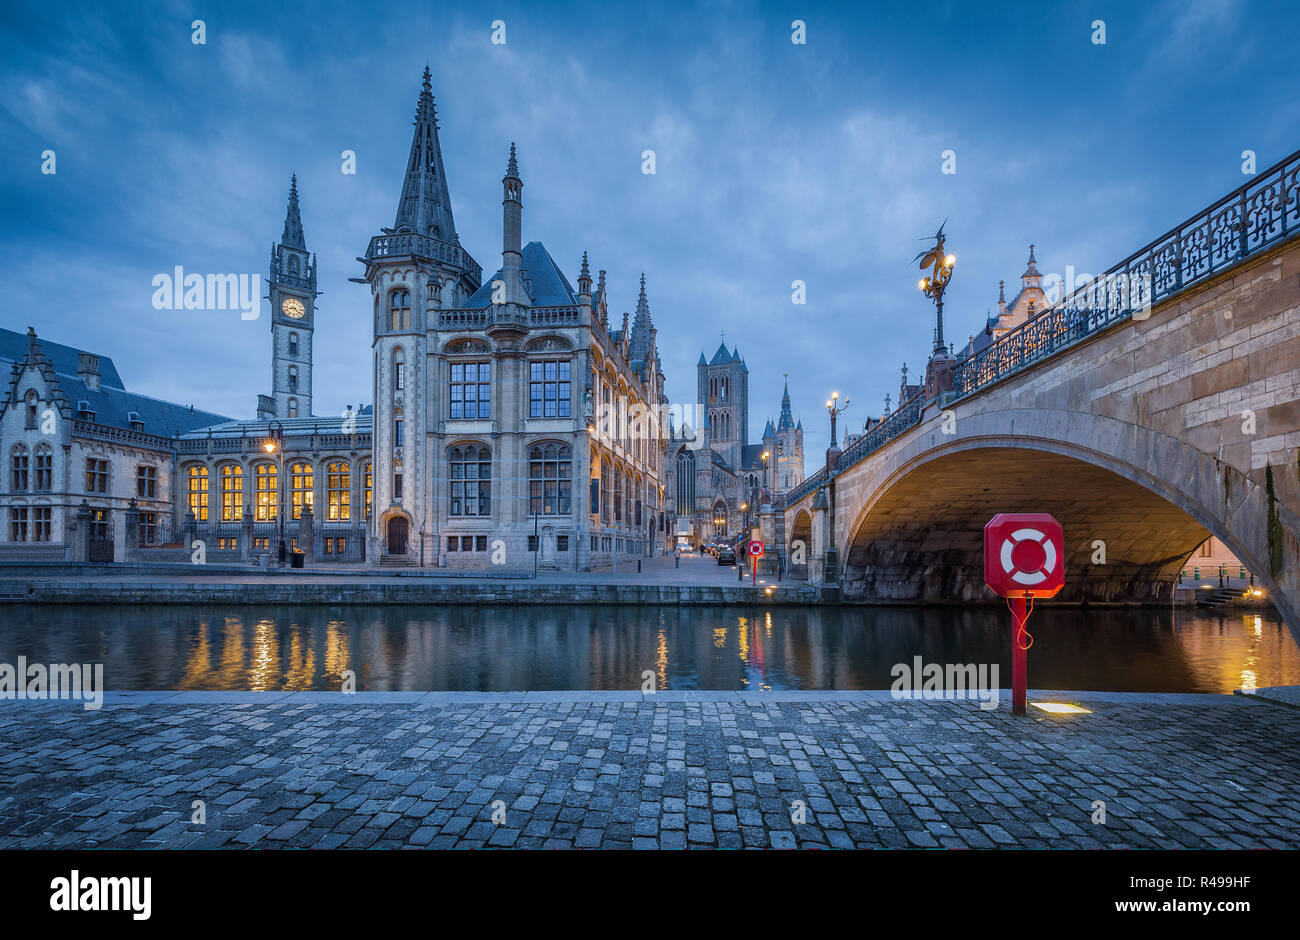 Famous Graslei in the historic city center of Ghent illuminated in beautiful post sunset twilight during blue hour at dusk, Flanders region, Belgium Stock Photo